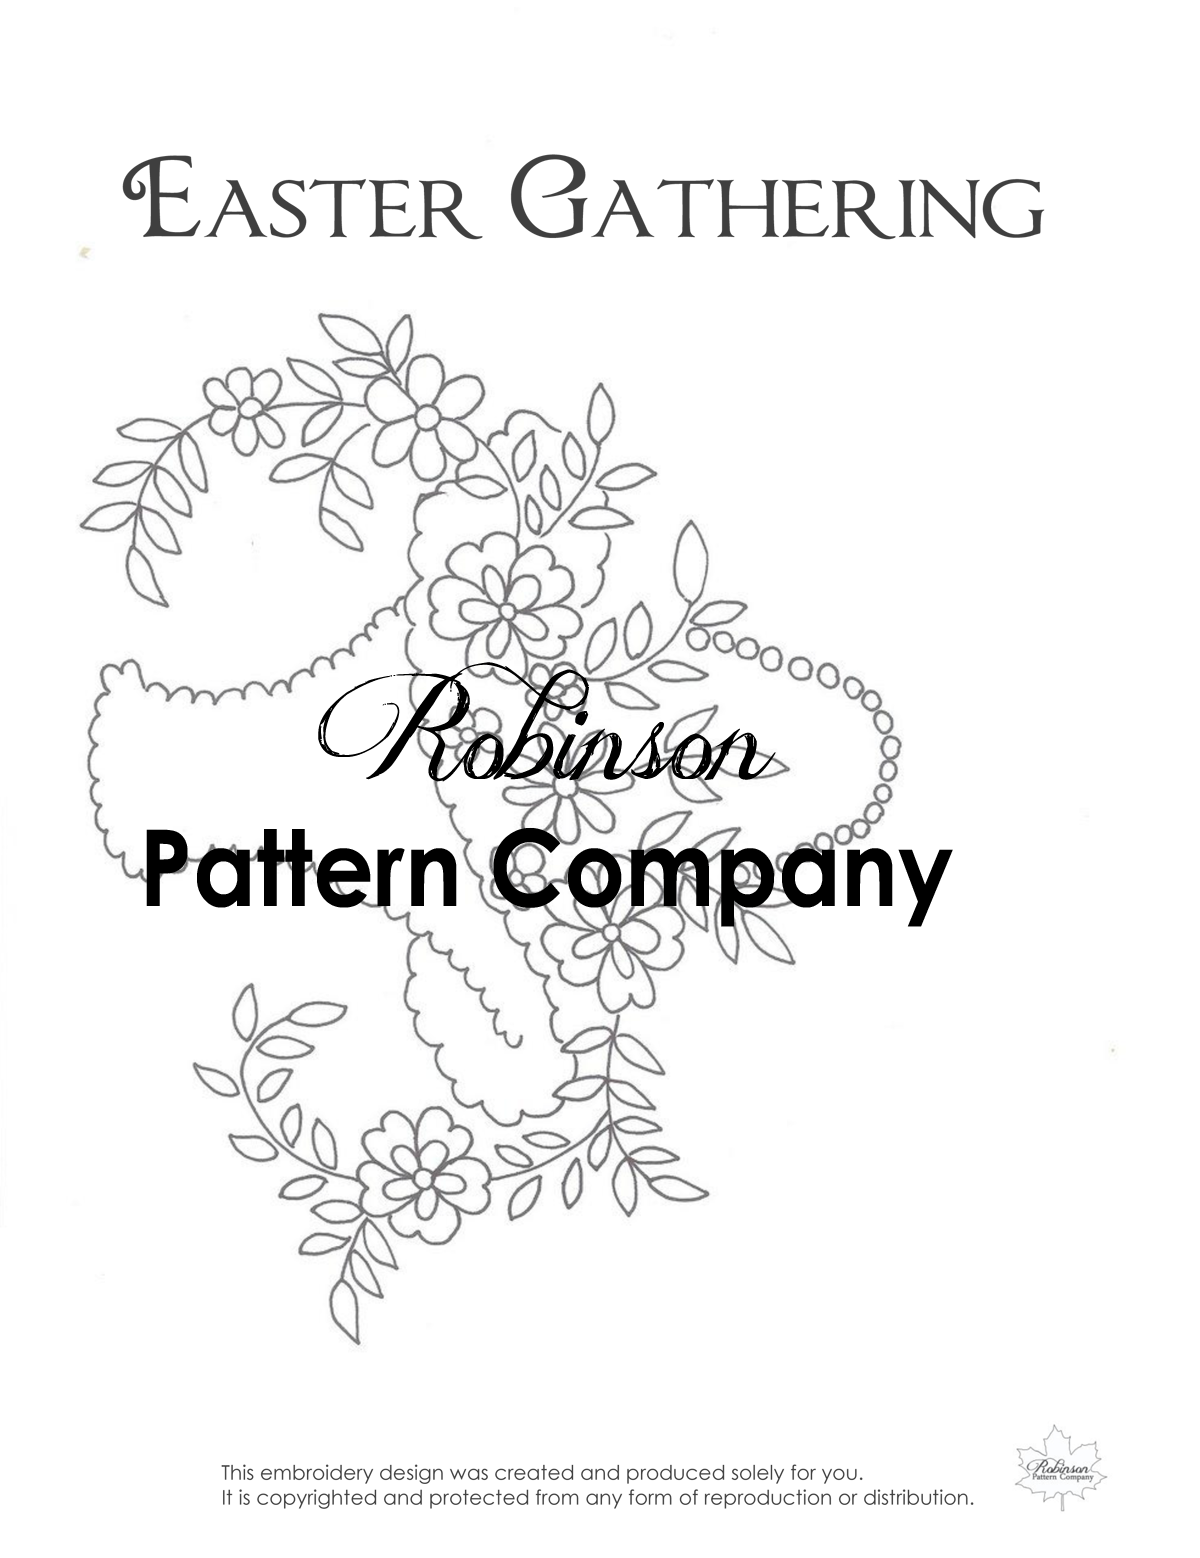 Easter Gathering Hand Embroidery pattern